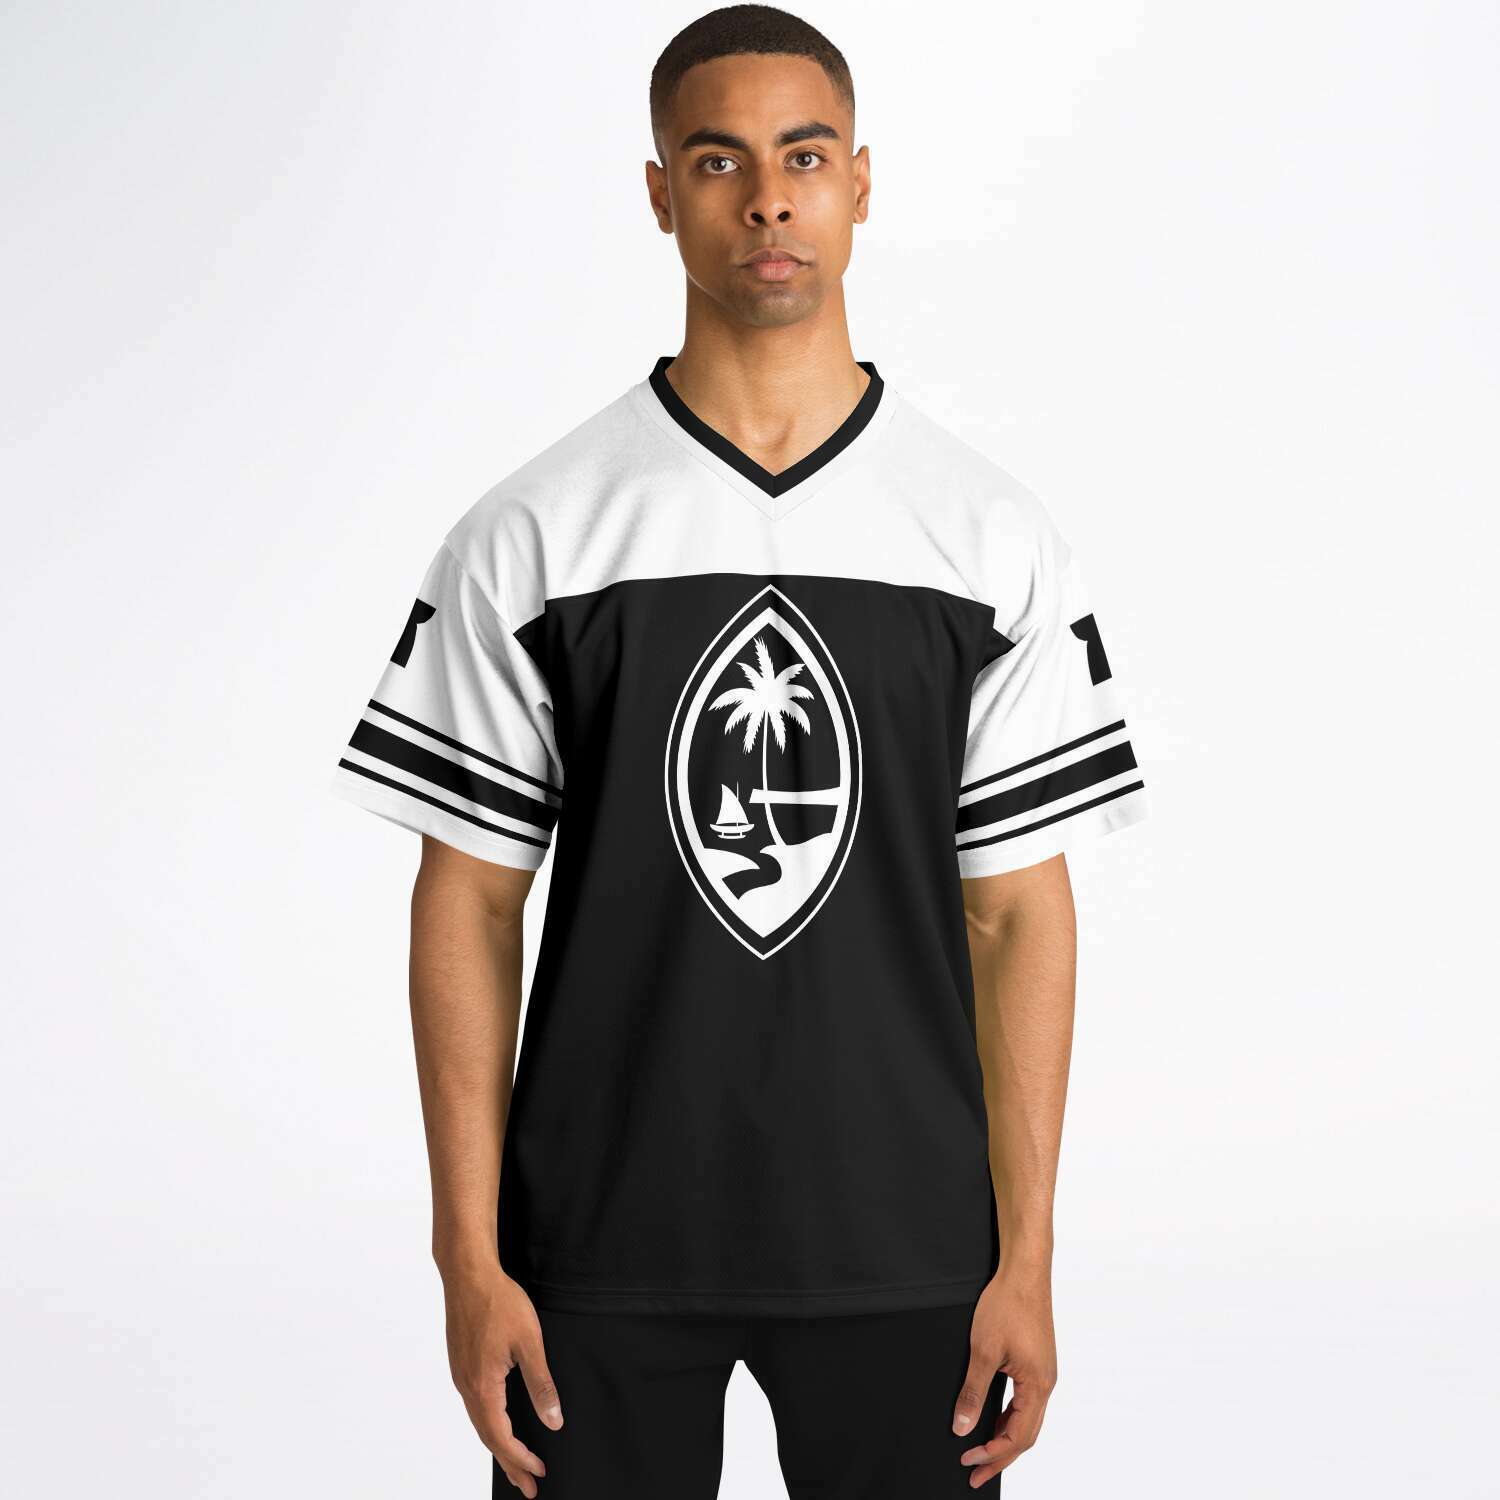 Guam Black and White Football Jersey